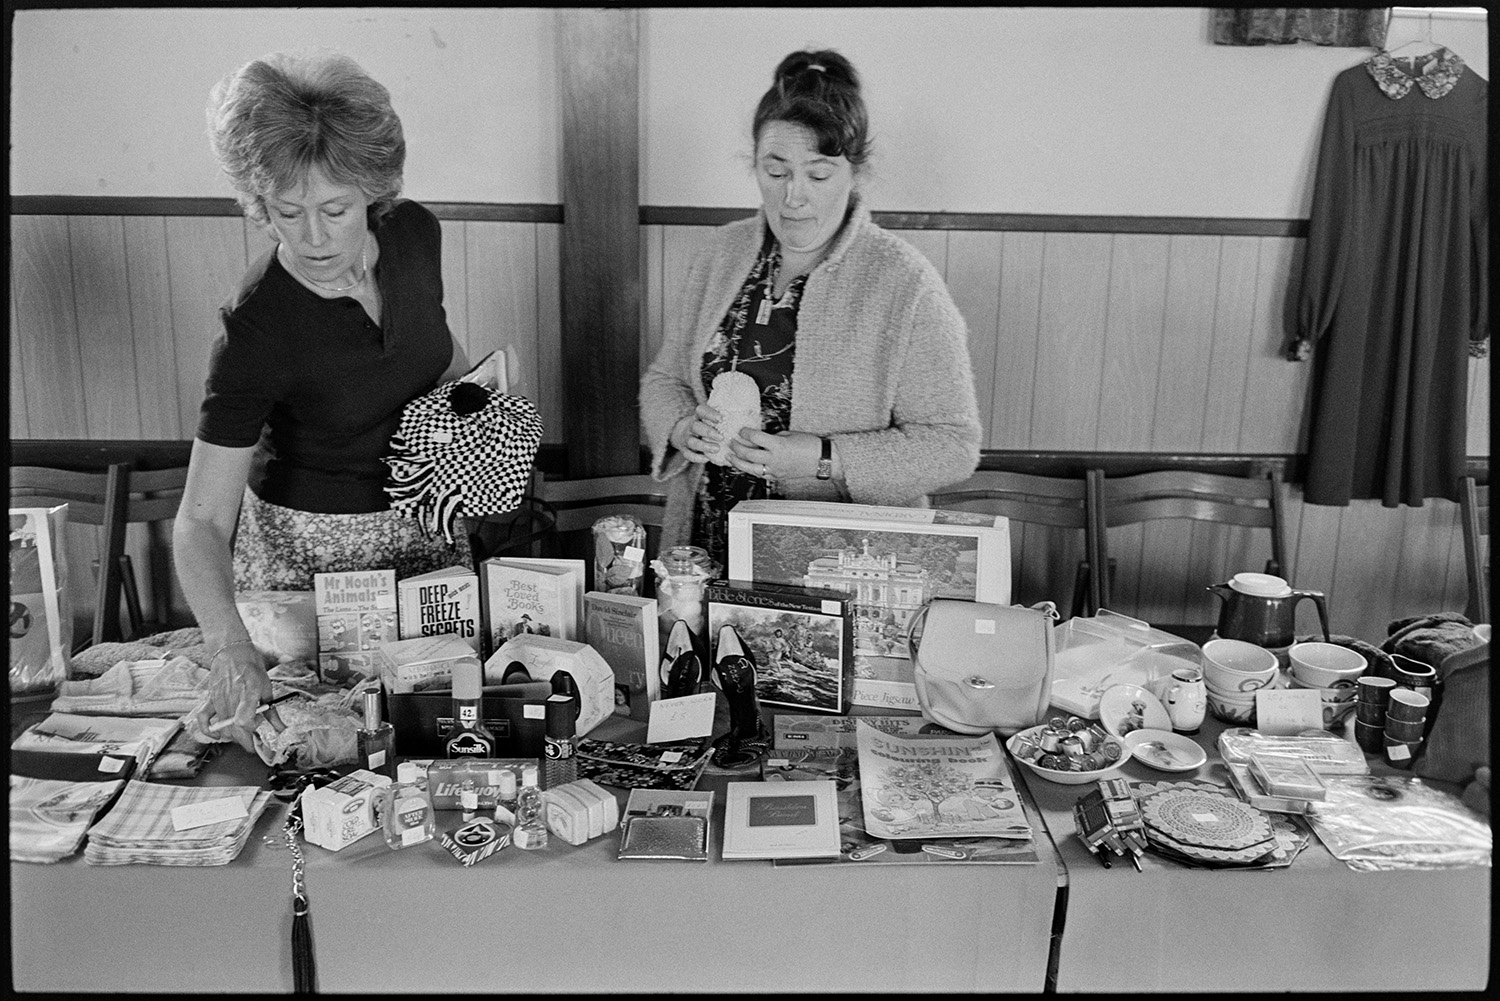 Schoolchildren giving concert in village hall, headmistress and children singing. 
[Two women running a bric-a-brac stall in an event at Dolton Village Hall. Various items are visible including books, a jigsaw and bags.]